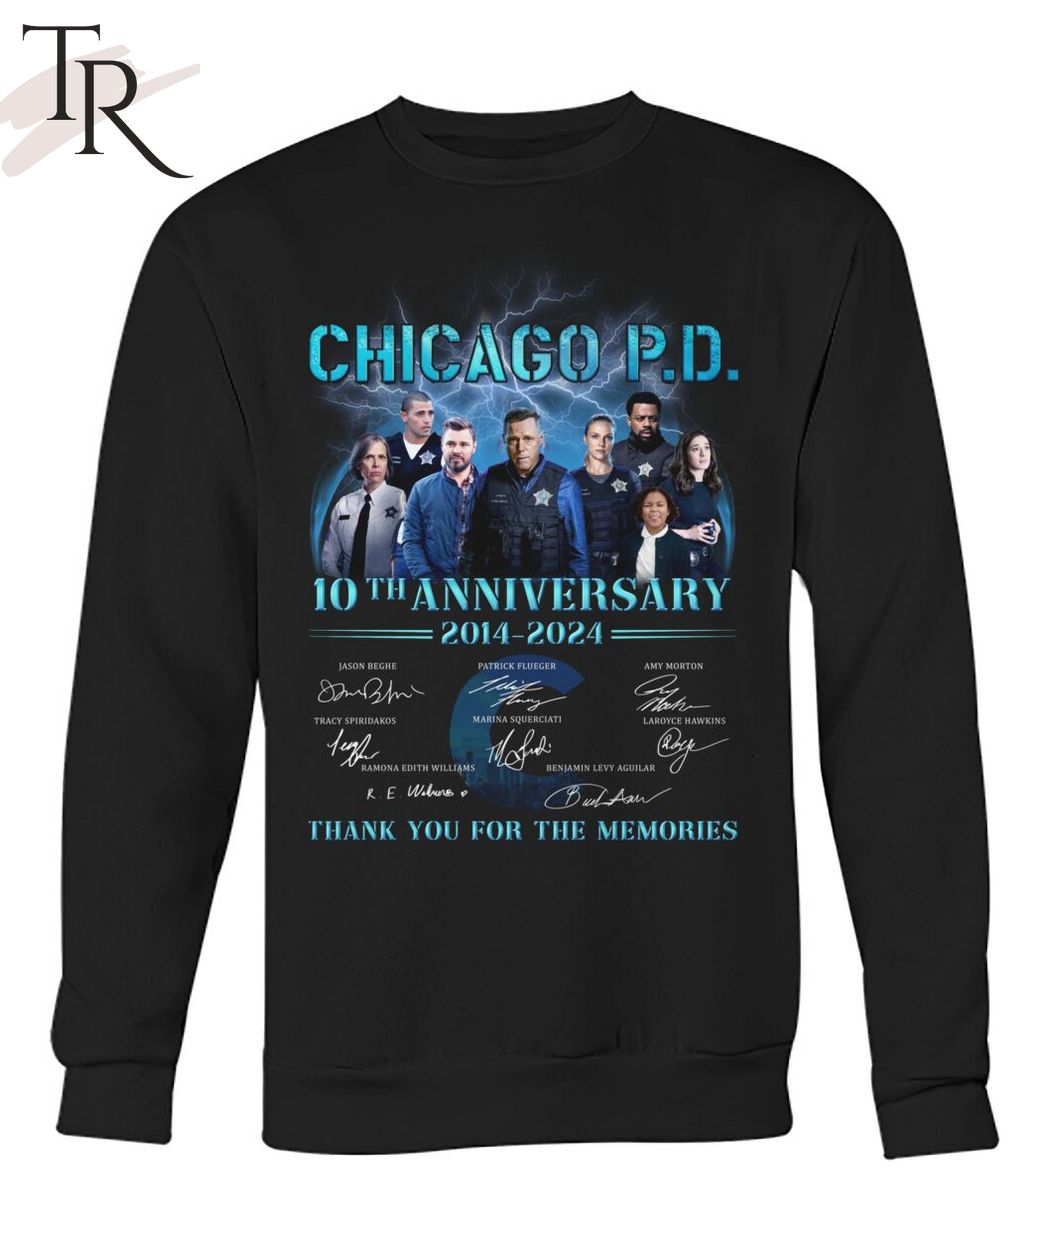 Chicago P.D. 10th Anniversary 2014-2024 Thank You For The Memories T-Shirt